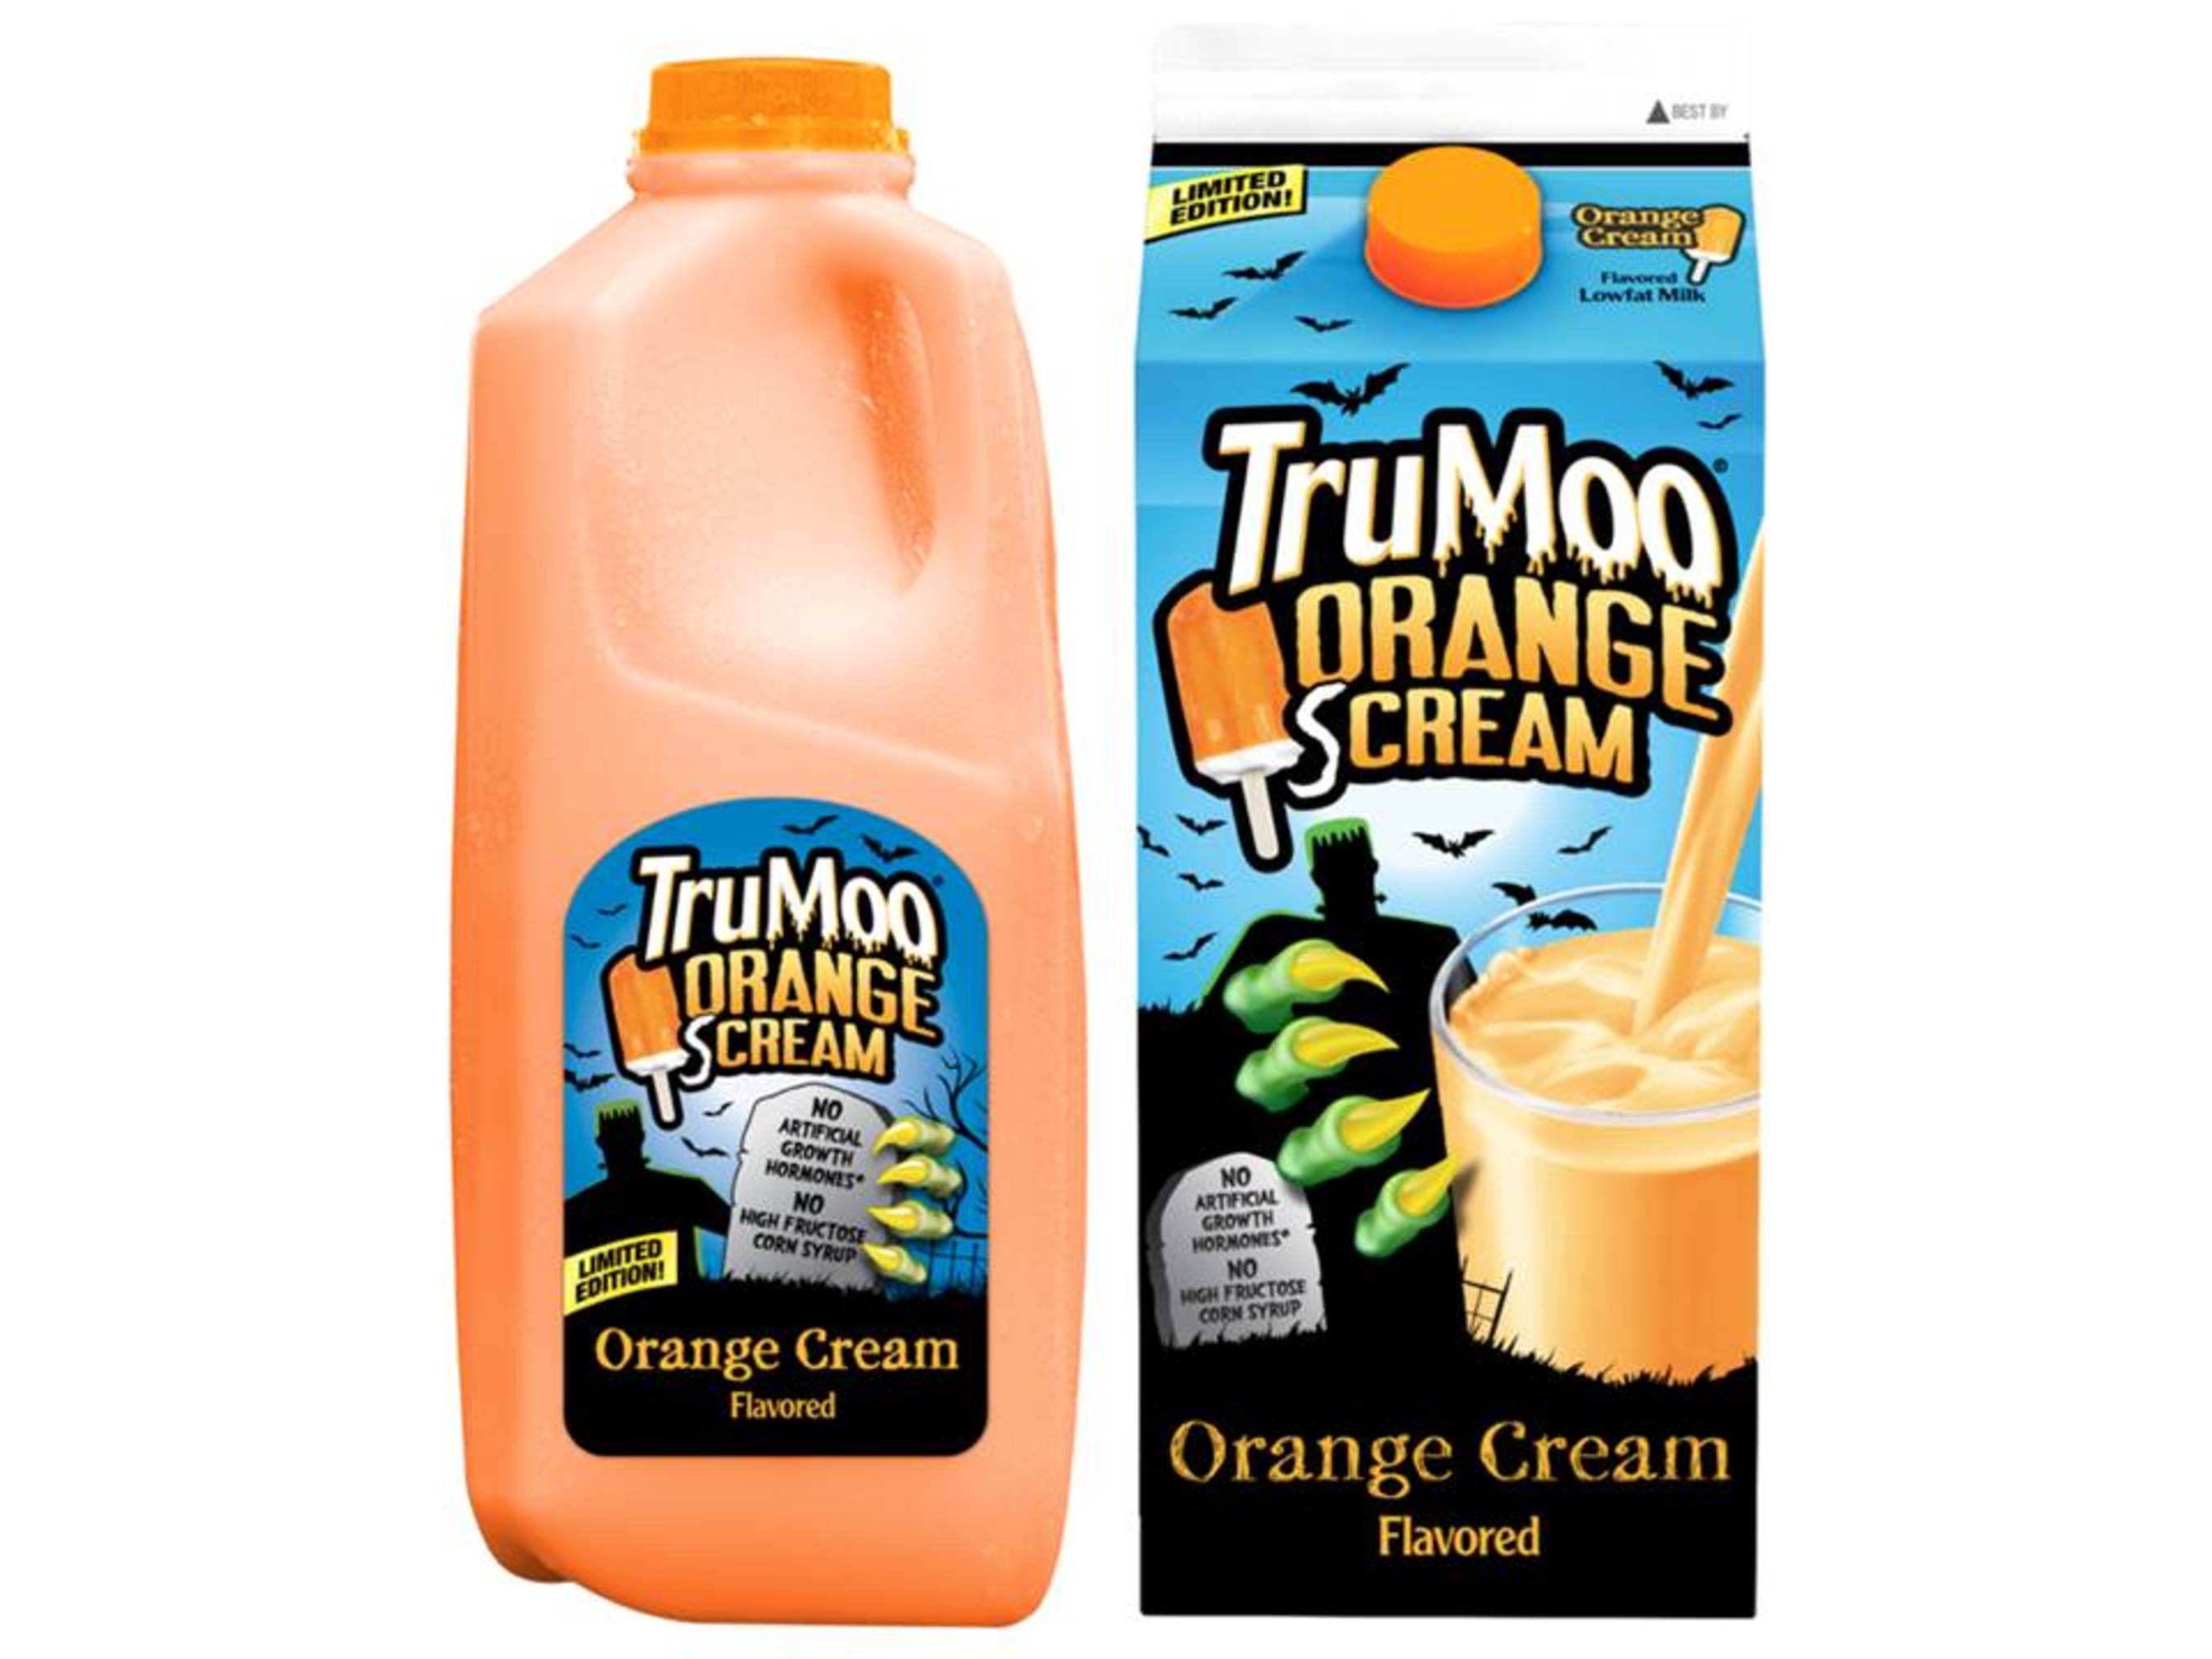 TruMoo(R) Casts A Spell With New Limited Edition Orange Scream Milk: Nation's Leading Flavored Milk Brand Brews Up Halloween-Inspired Drink (PRNewsFoto/Dean Foods Company)